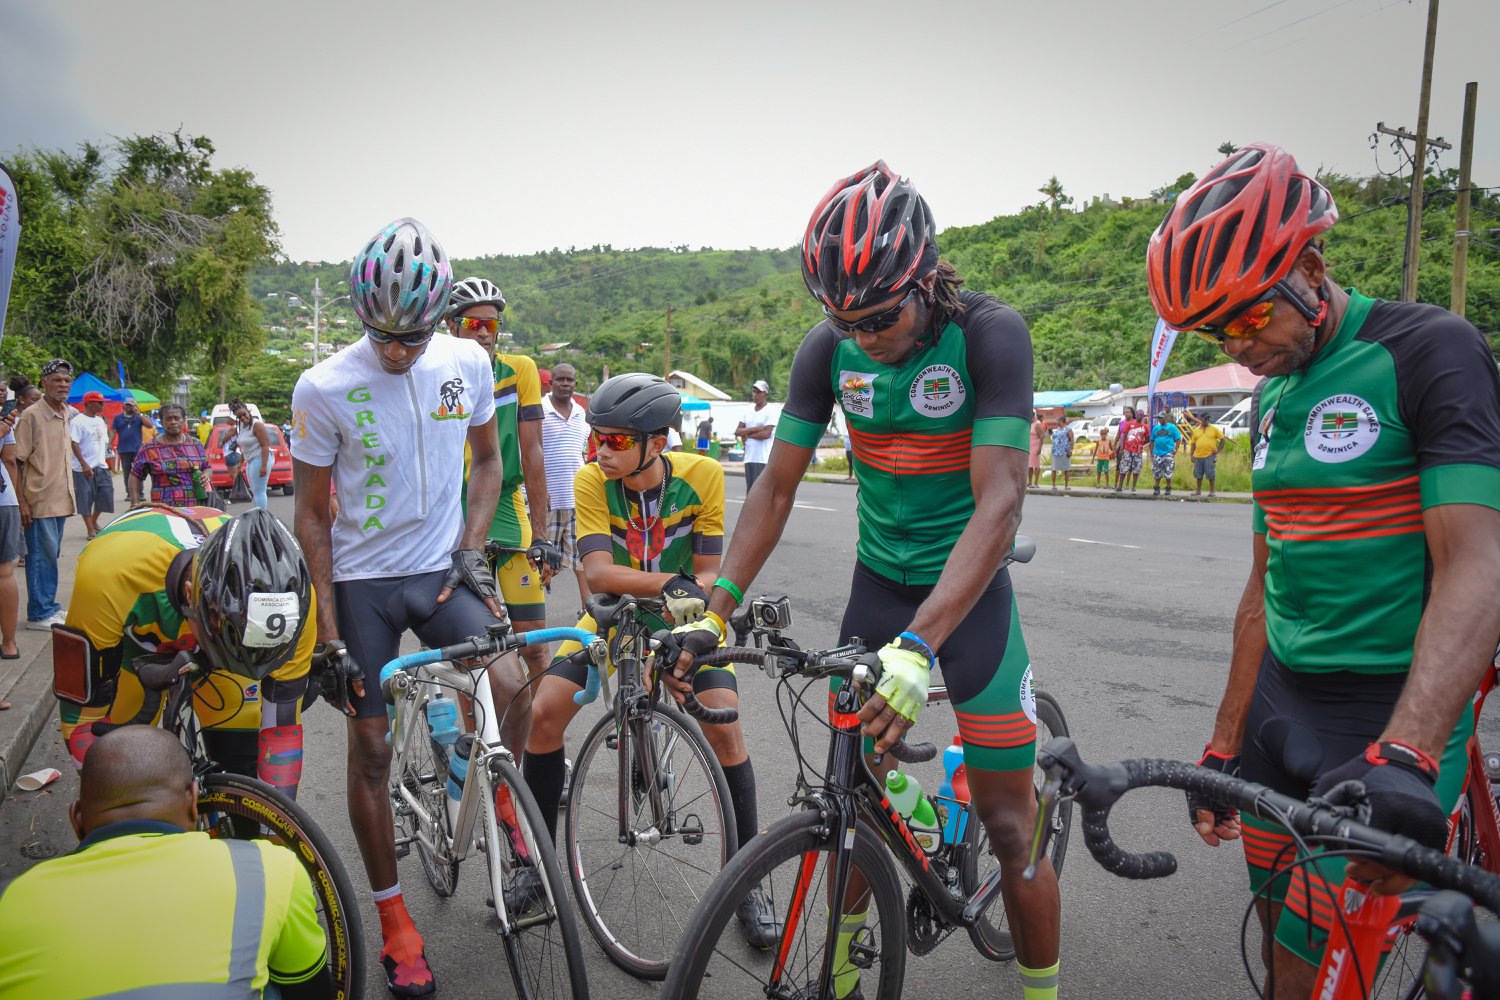 L-R Chester Letang, a member of the Grenada cycling team, Kohath Baron, Bram Sanderson, and Ellison Roudette gather prior to the start of the 2018 OECS Cycling Championship in Dominica, July 1, 2018.